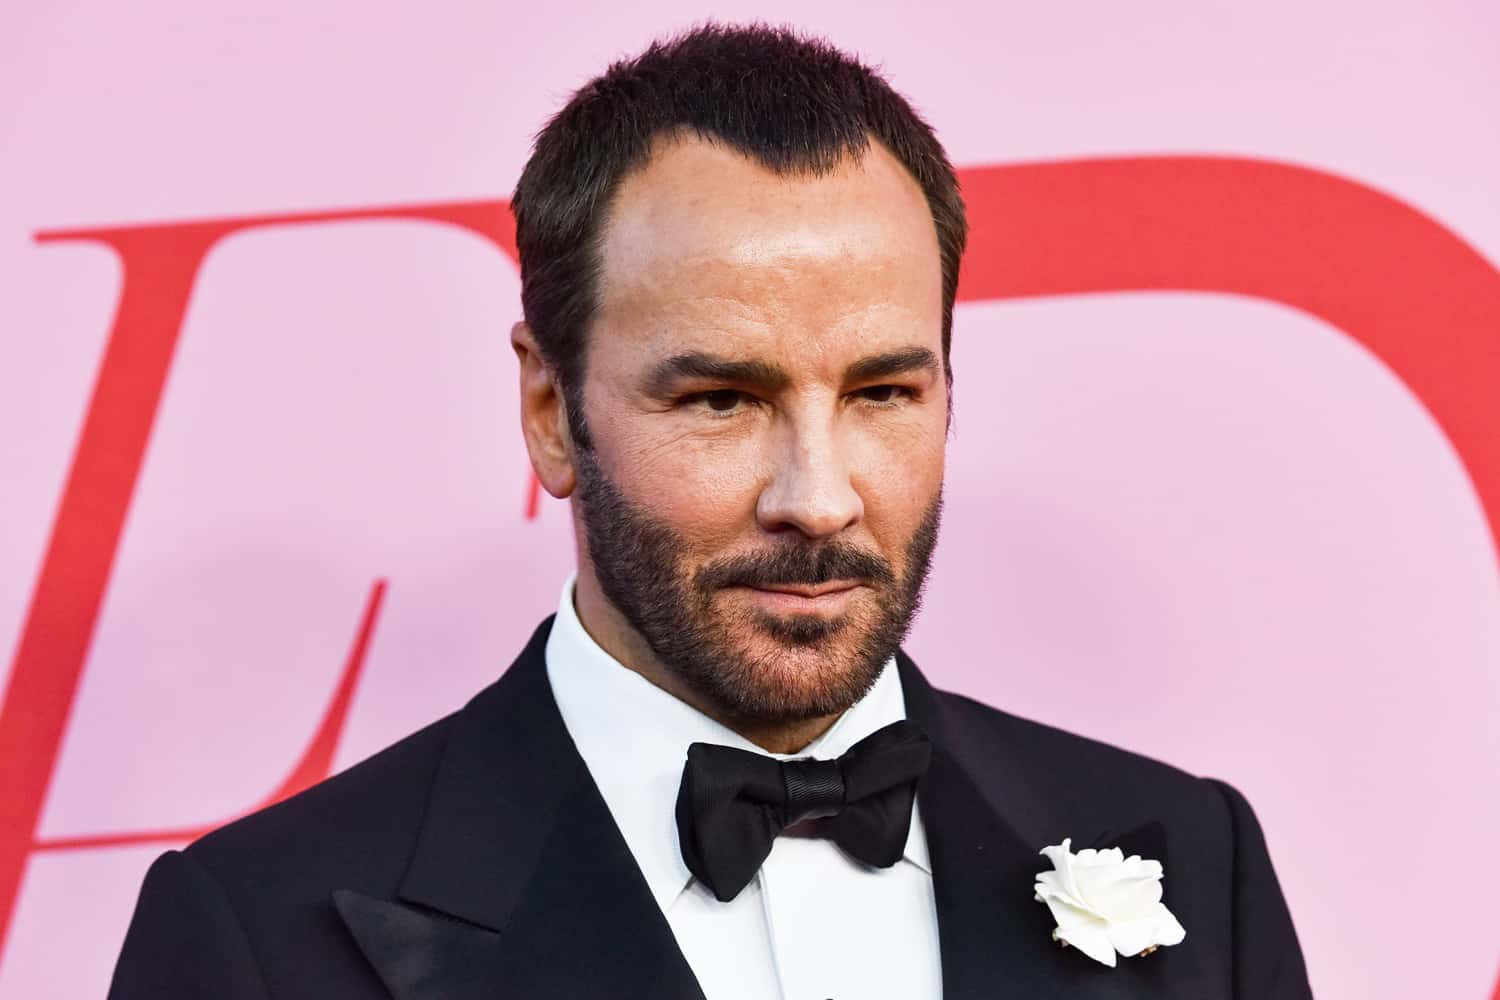 Tom Ford S Guide To Looking Hot On Zoom Marketing During A Pandemic